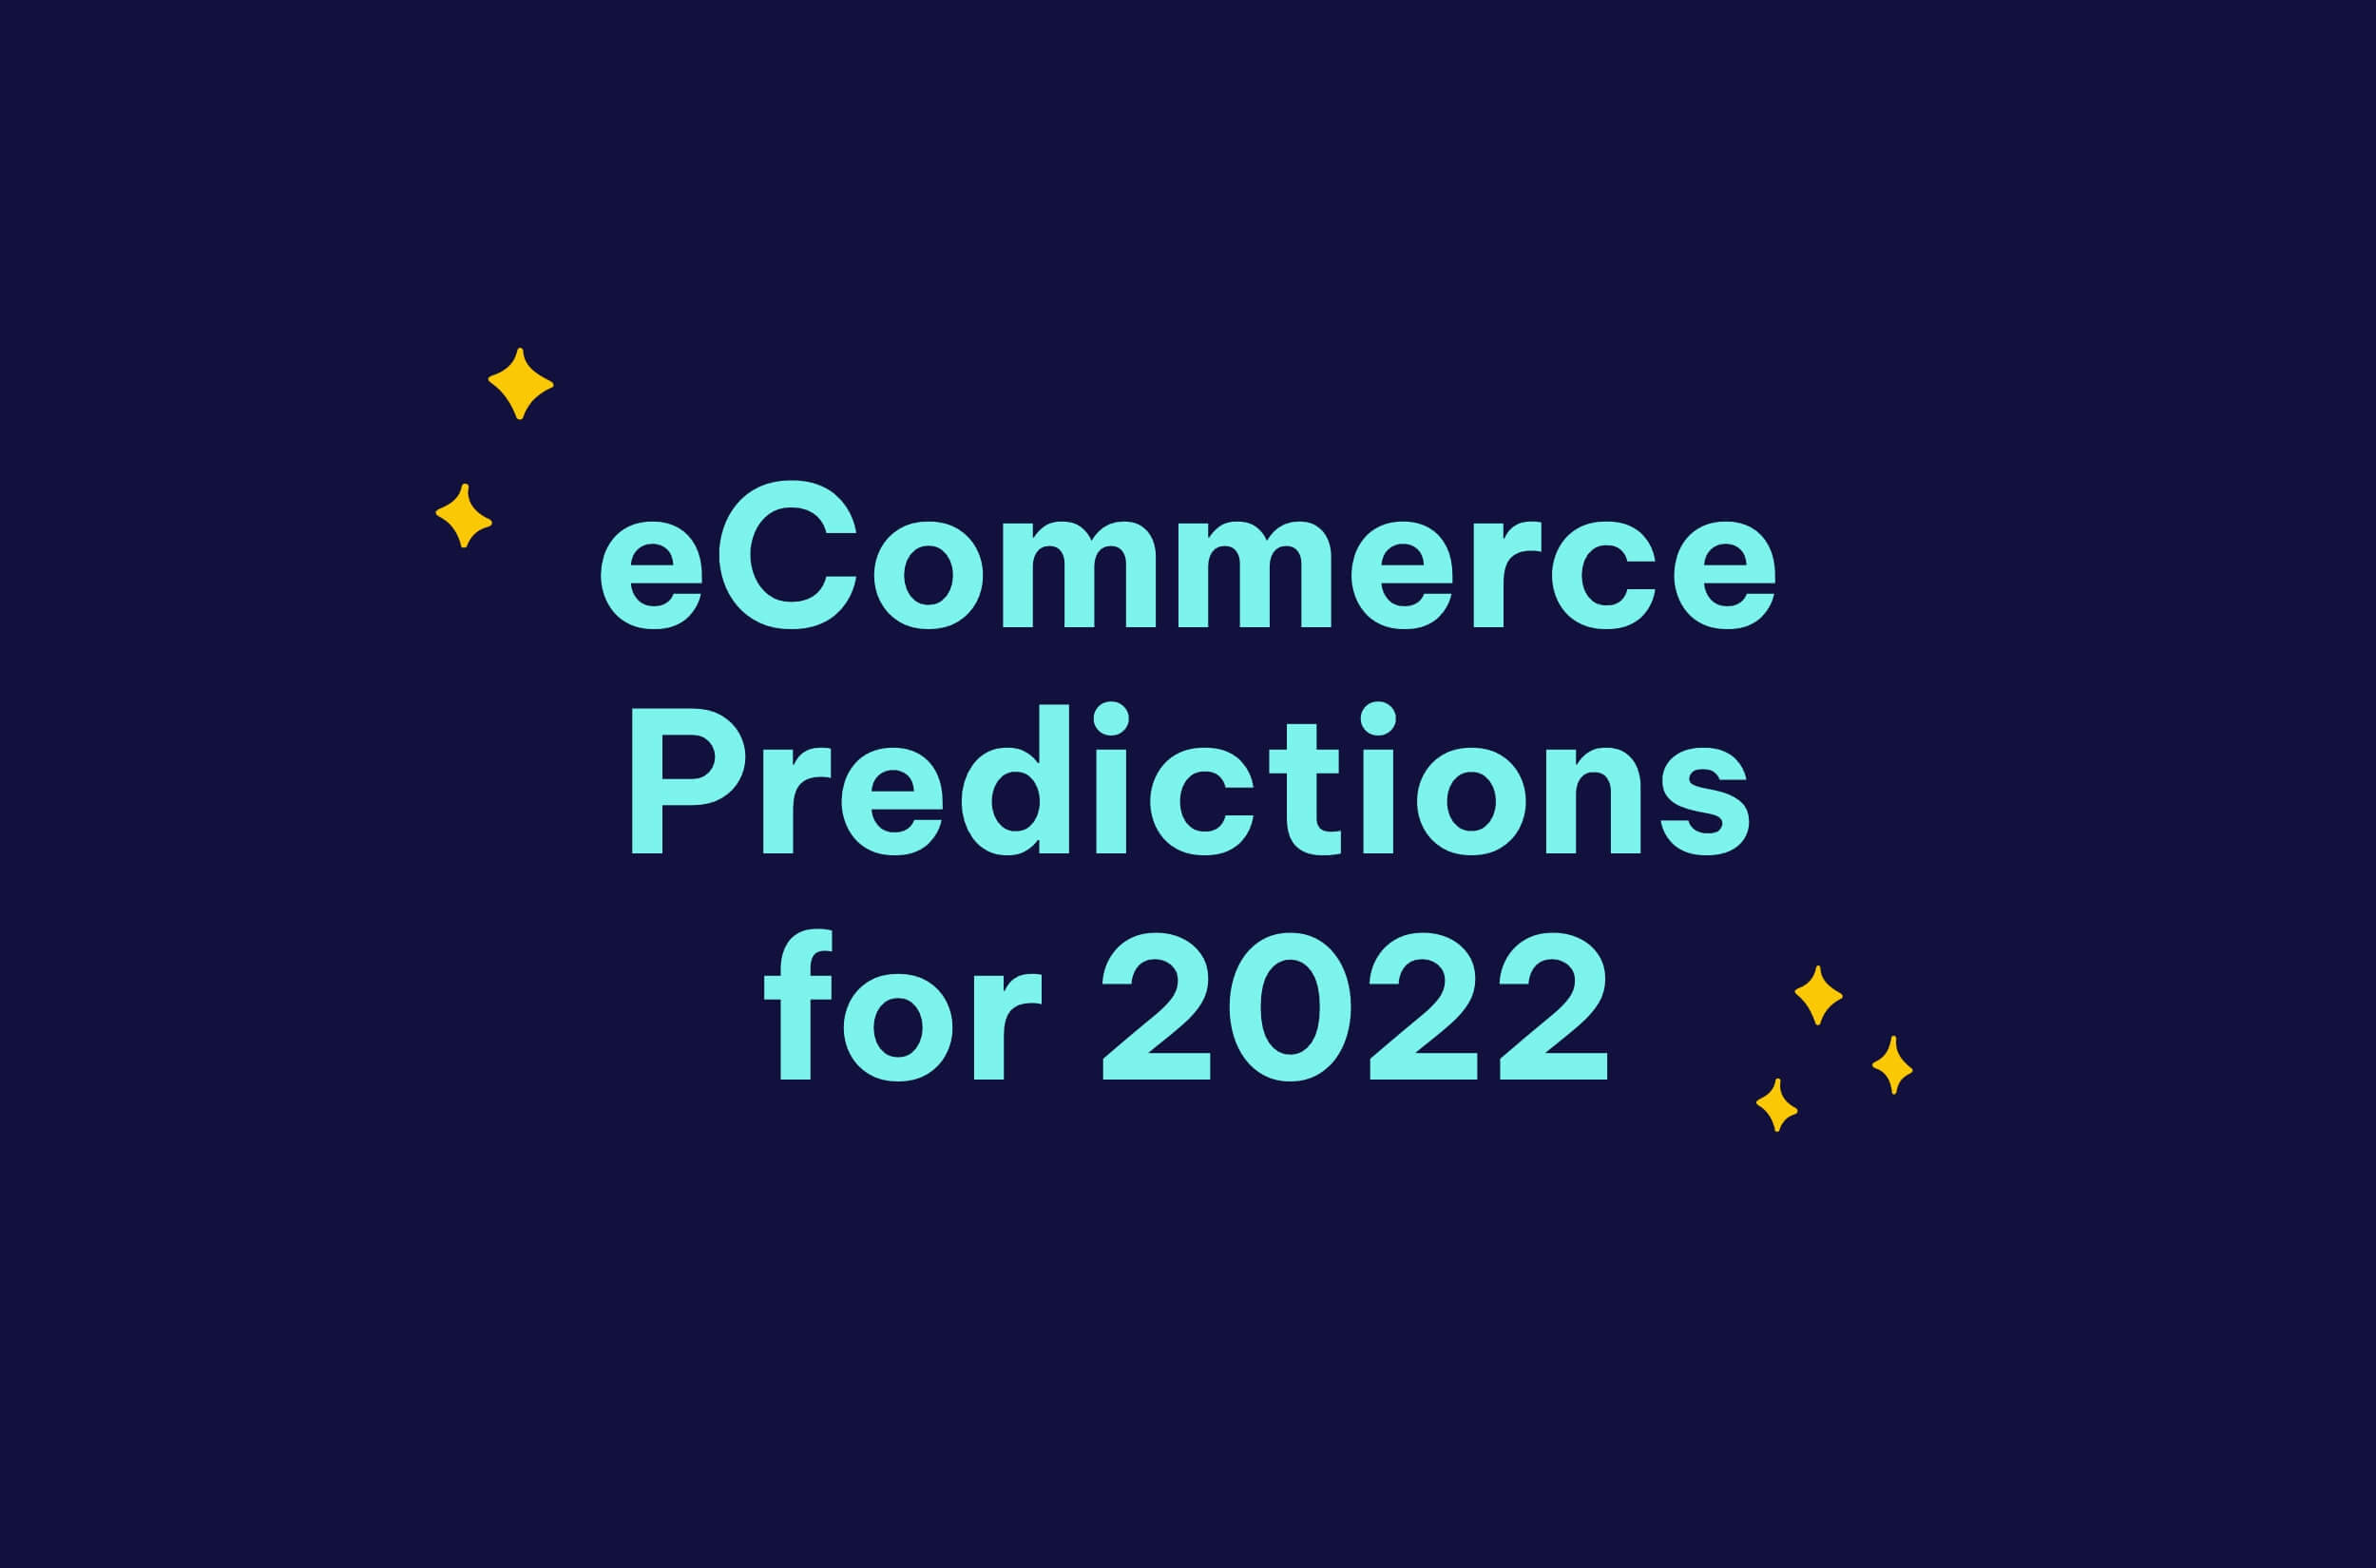 eCommerce Predictions for 2022